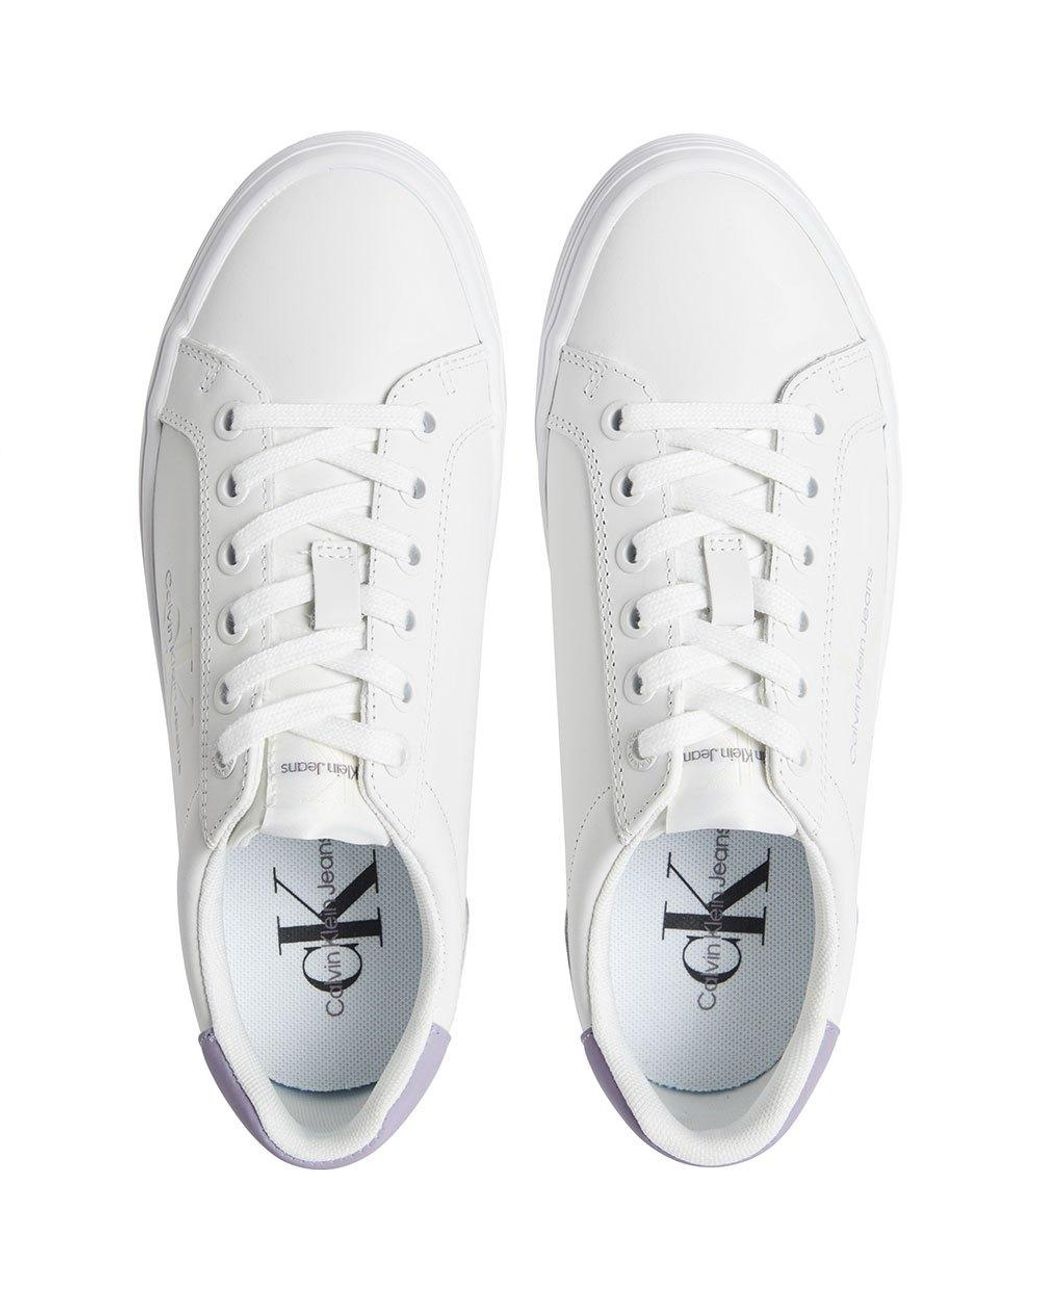 Calvin Klein Vulc Flatform Laceup Pearl Trainers in White | Lyst